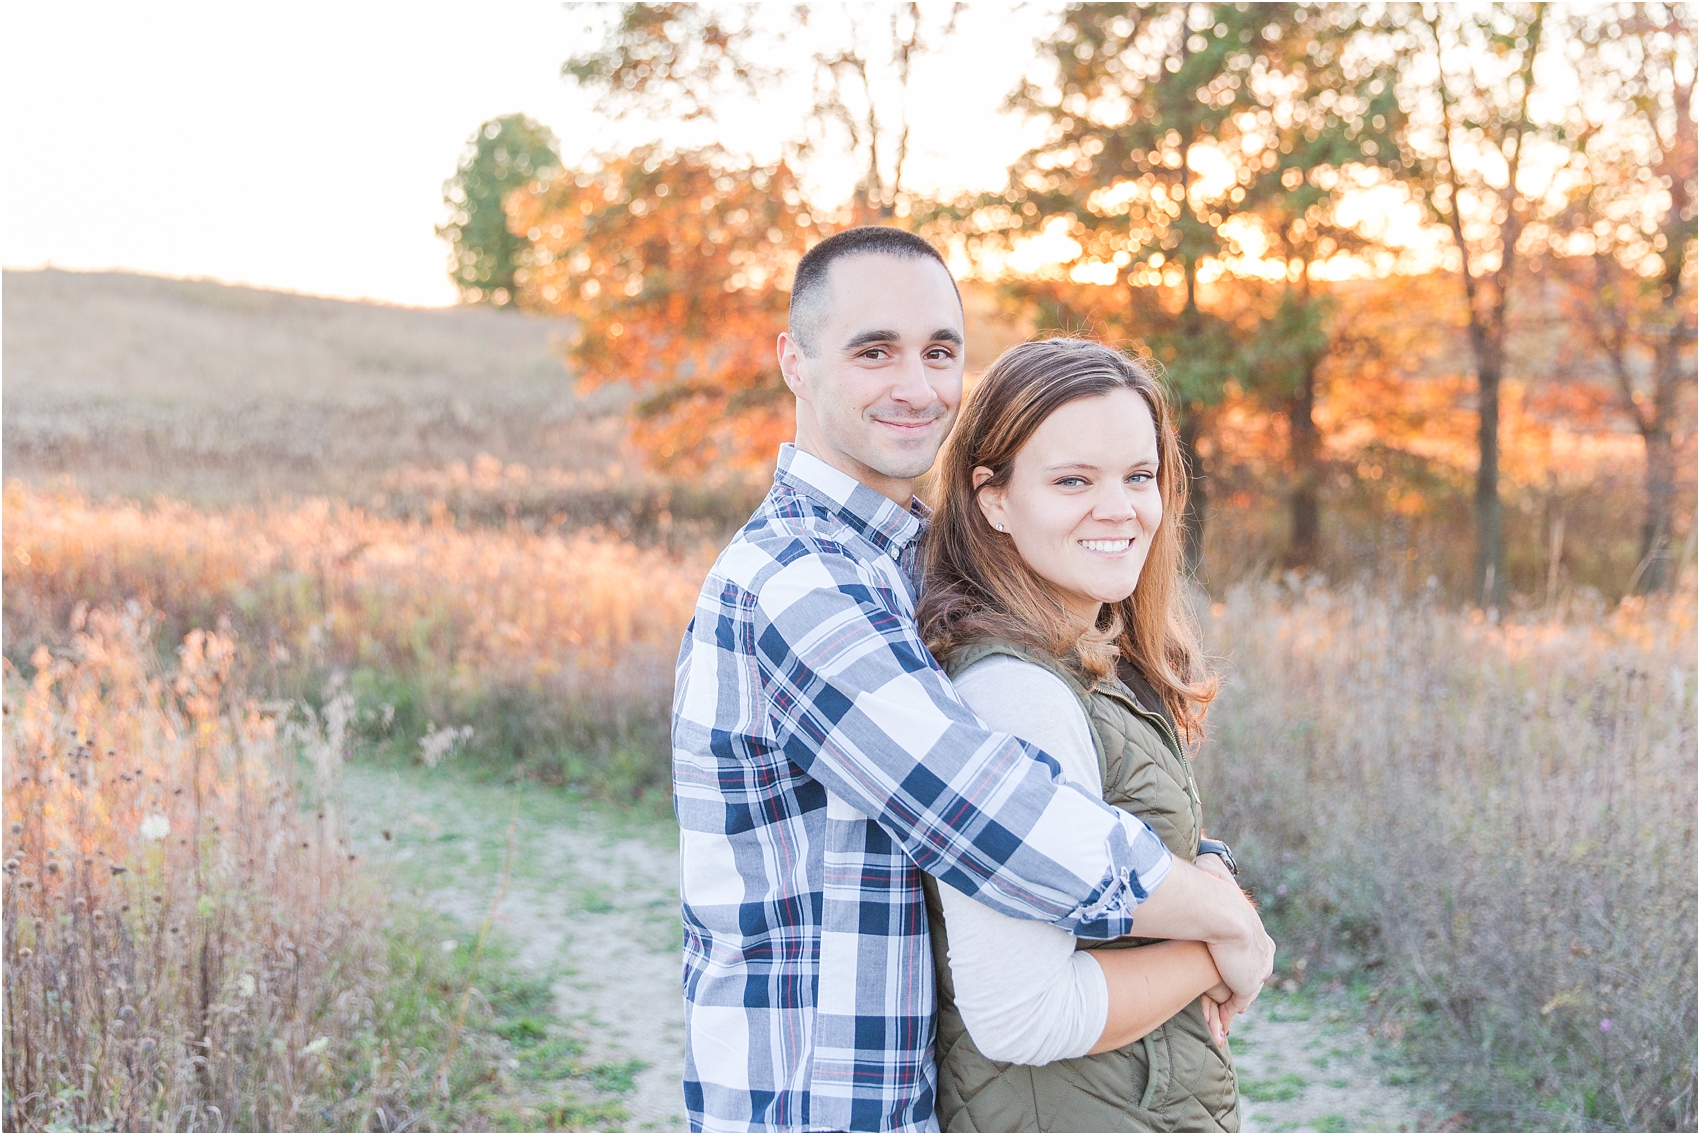 romantic-fall-engagement-photos-at-indian-springs-metropark-in-clarkston-mi-by-courtney-carolyn-photography_0028.jpg